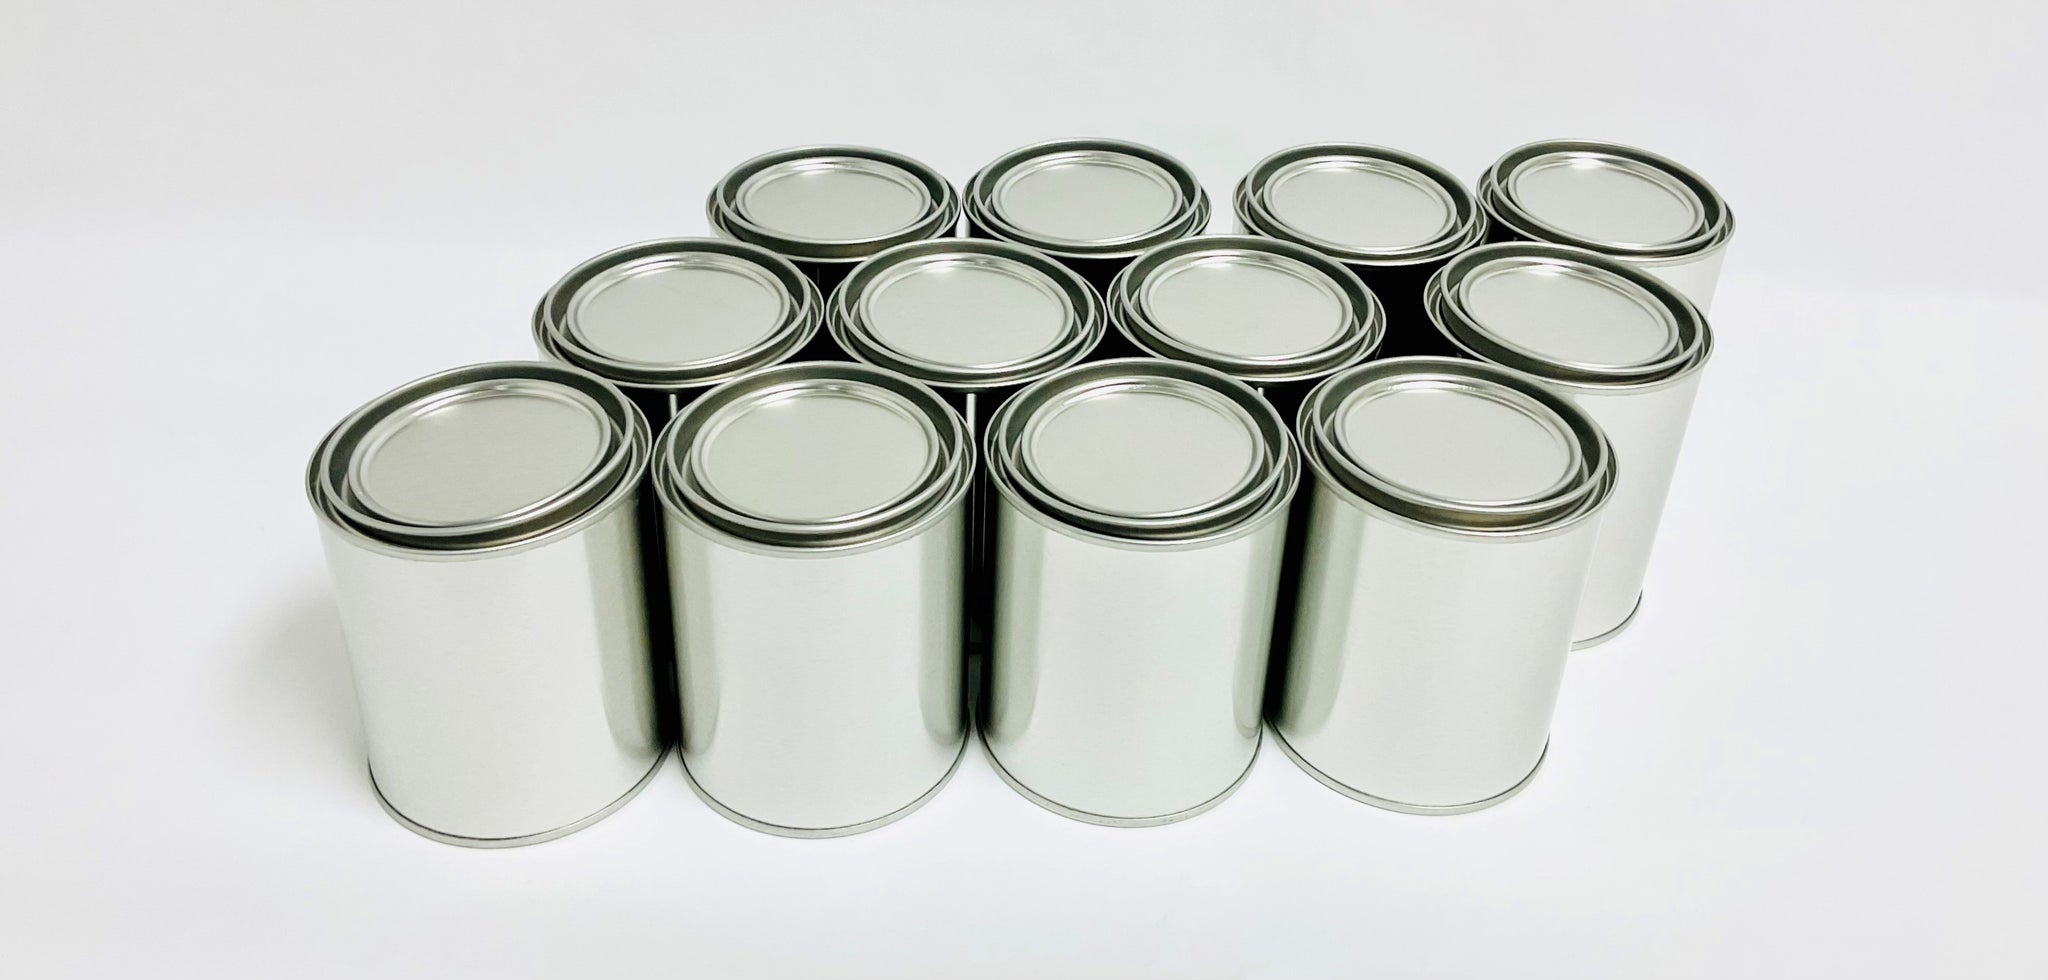 12 Packs Empty Metallic Paint Cans With Cover 1.9 Pint Quart Size